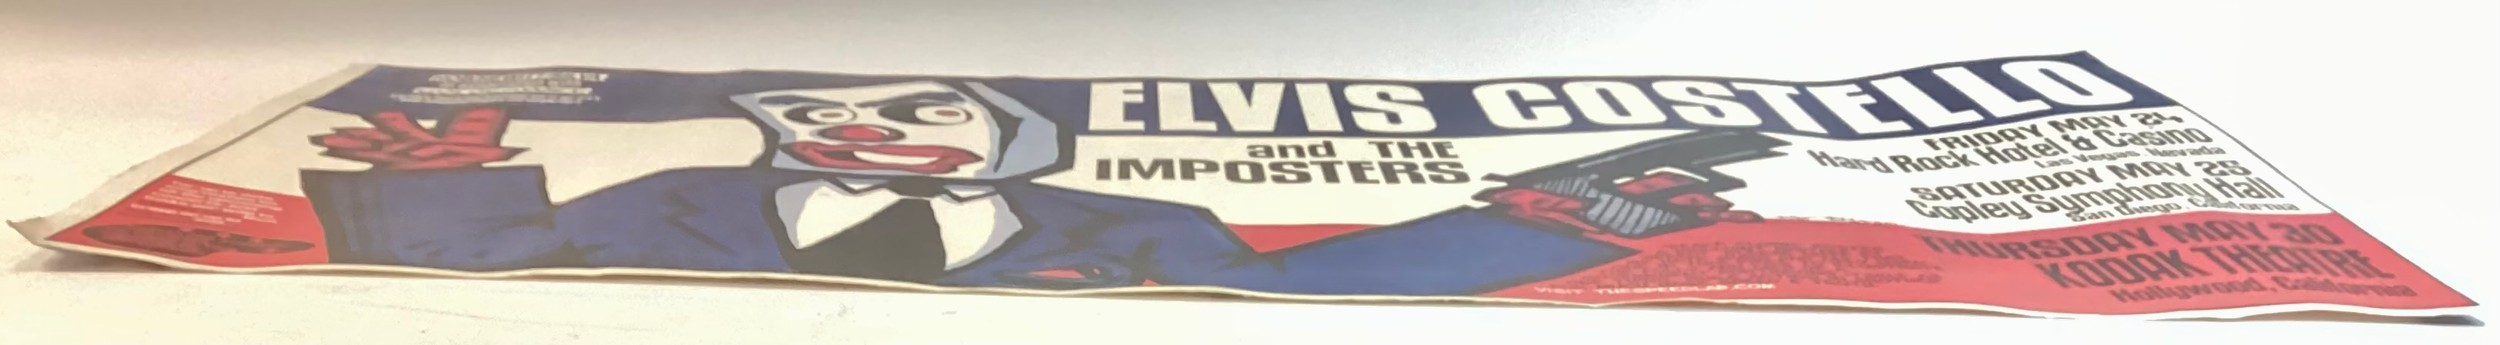 ELVIS COSTELLO AND THE IMPOSTERS SILKSCREEN POSTER. SPEED. This silkscreen poster is from their - Bild 2 aus 3